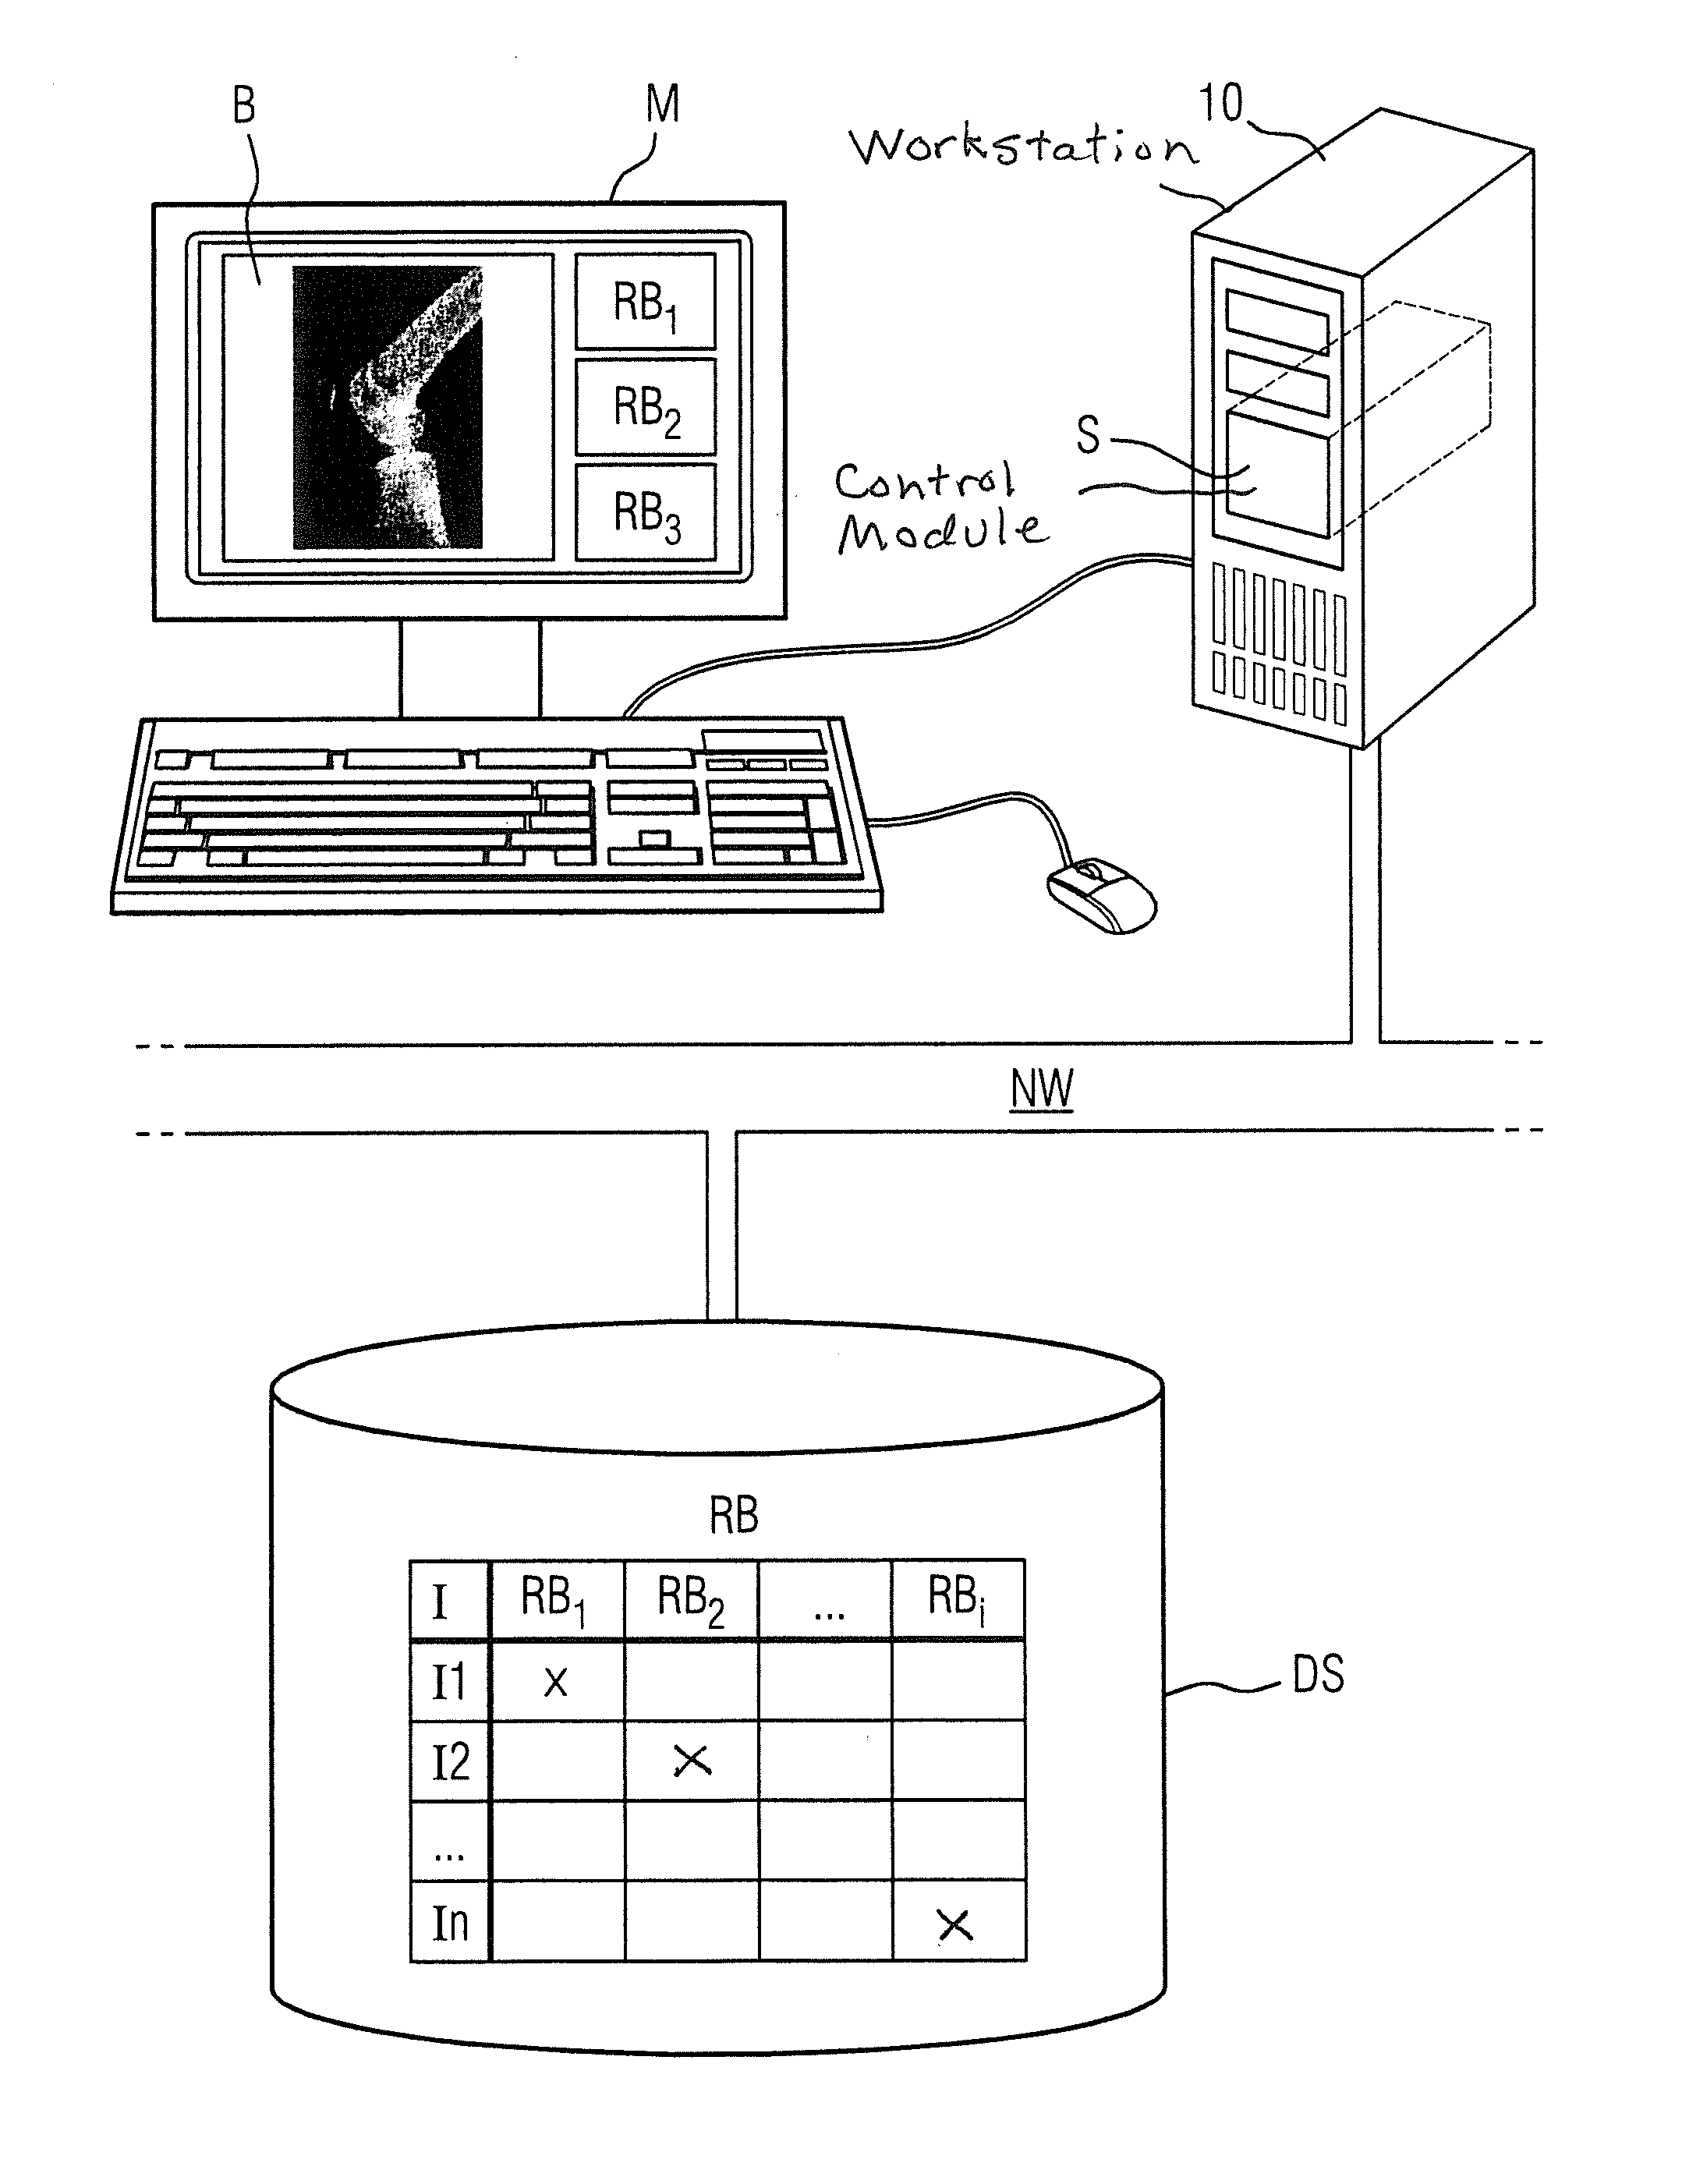 Structured, image-assisted finding generation